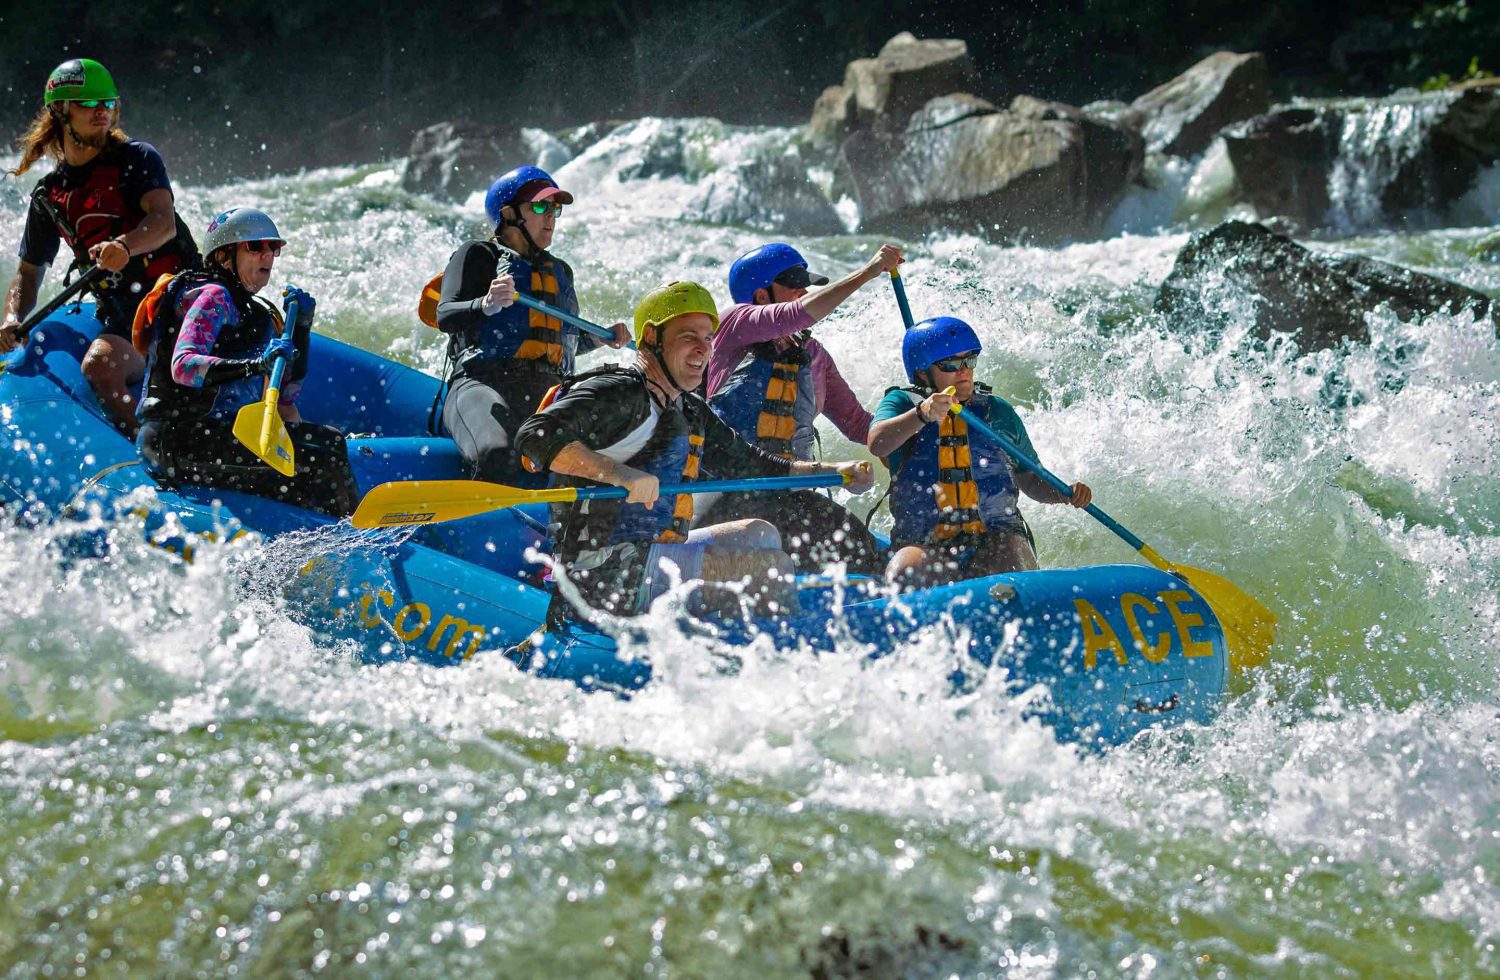 Fall Upper Gauley Full Day Whitewater Rafting Trip With Meals